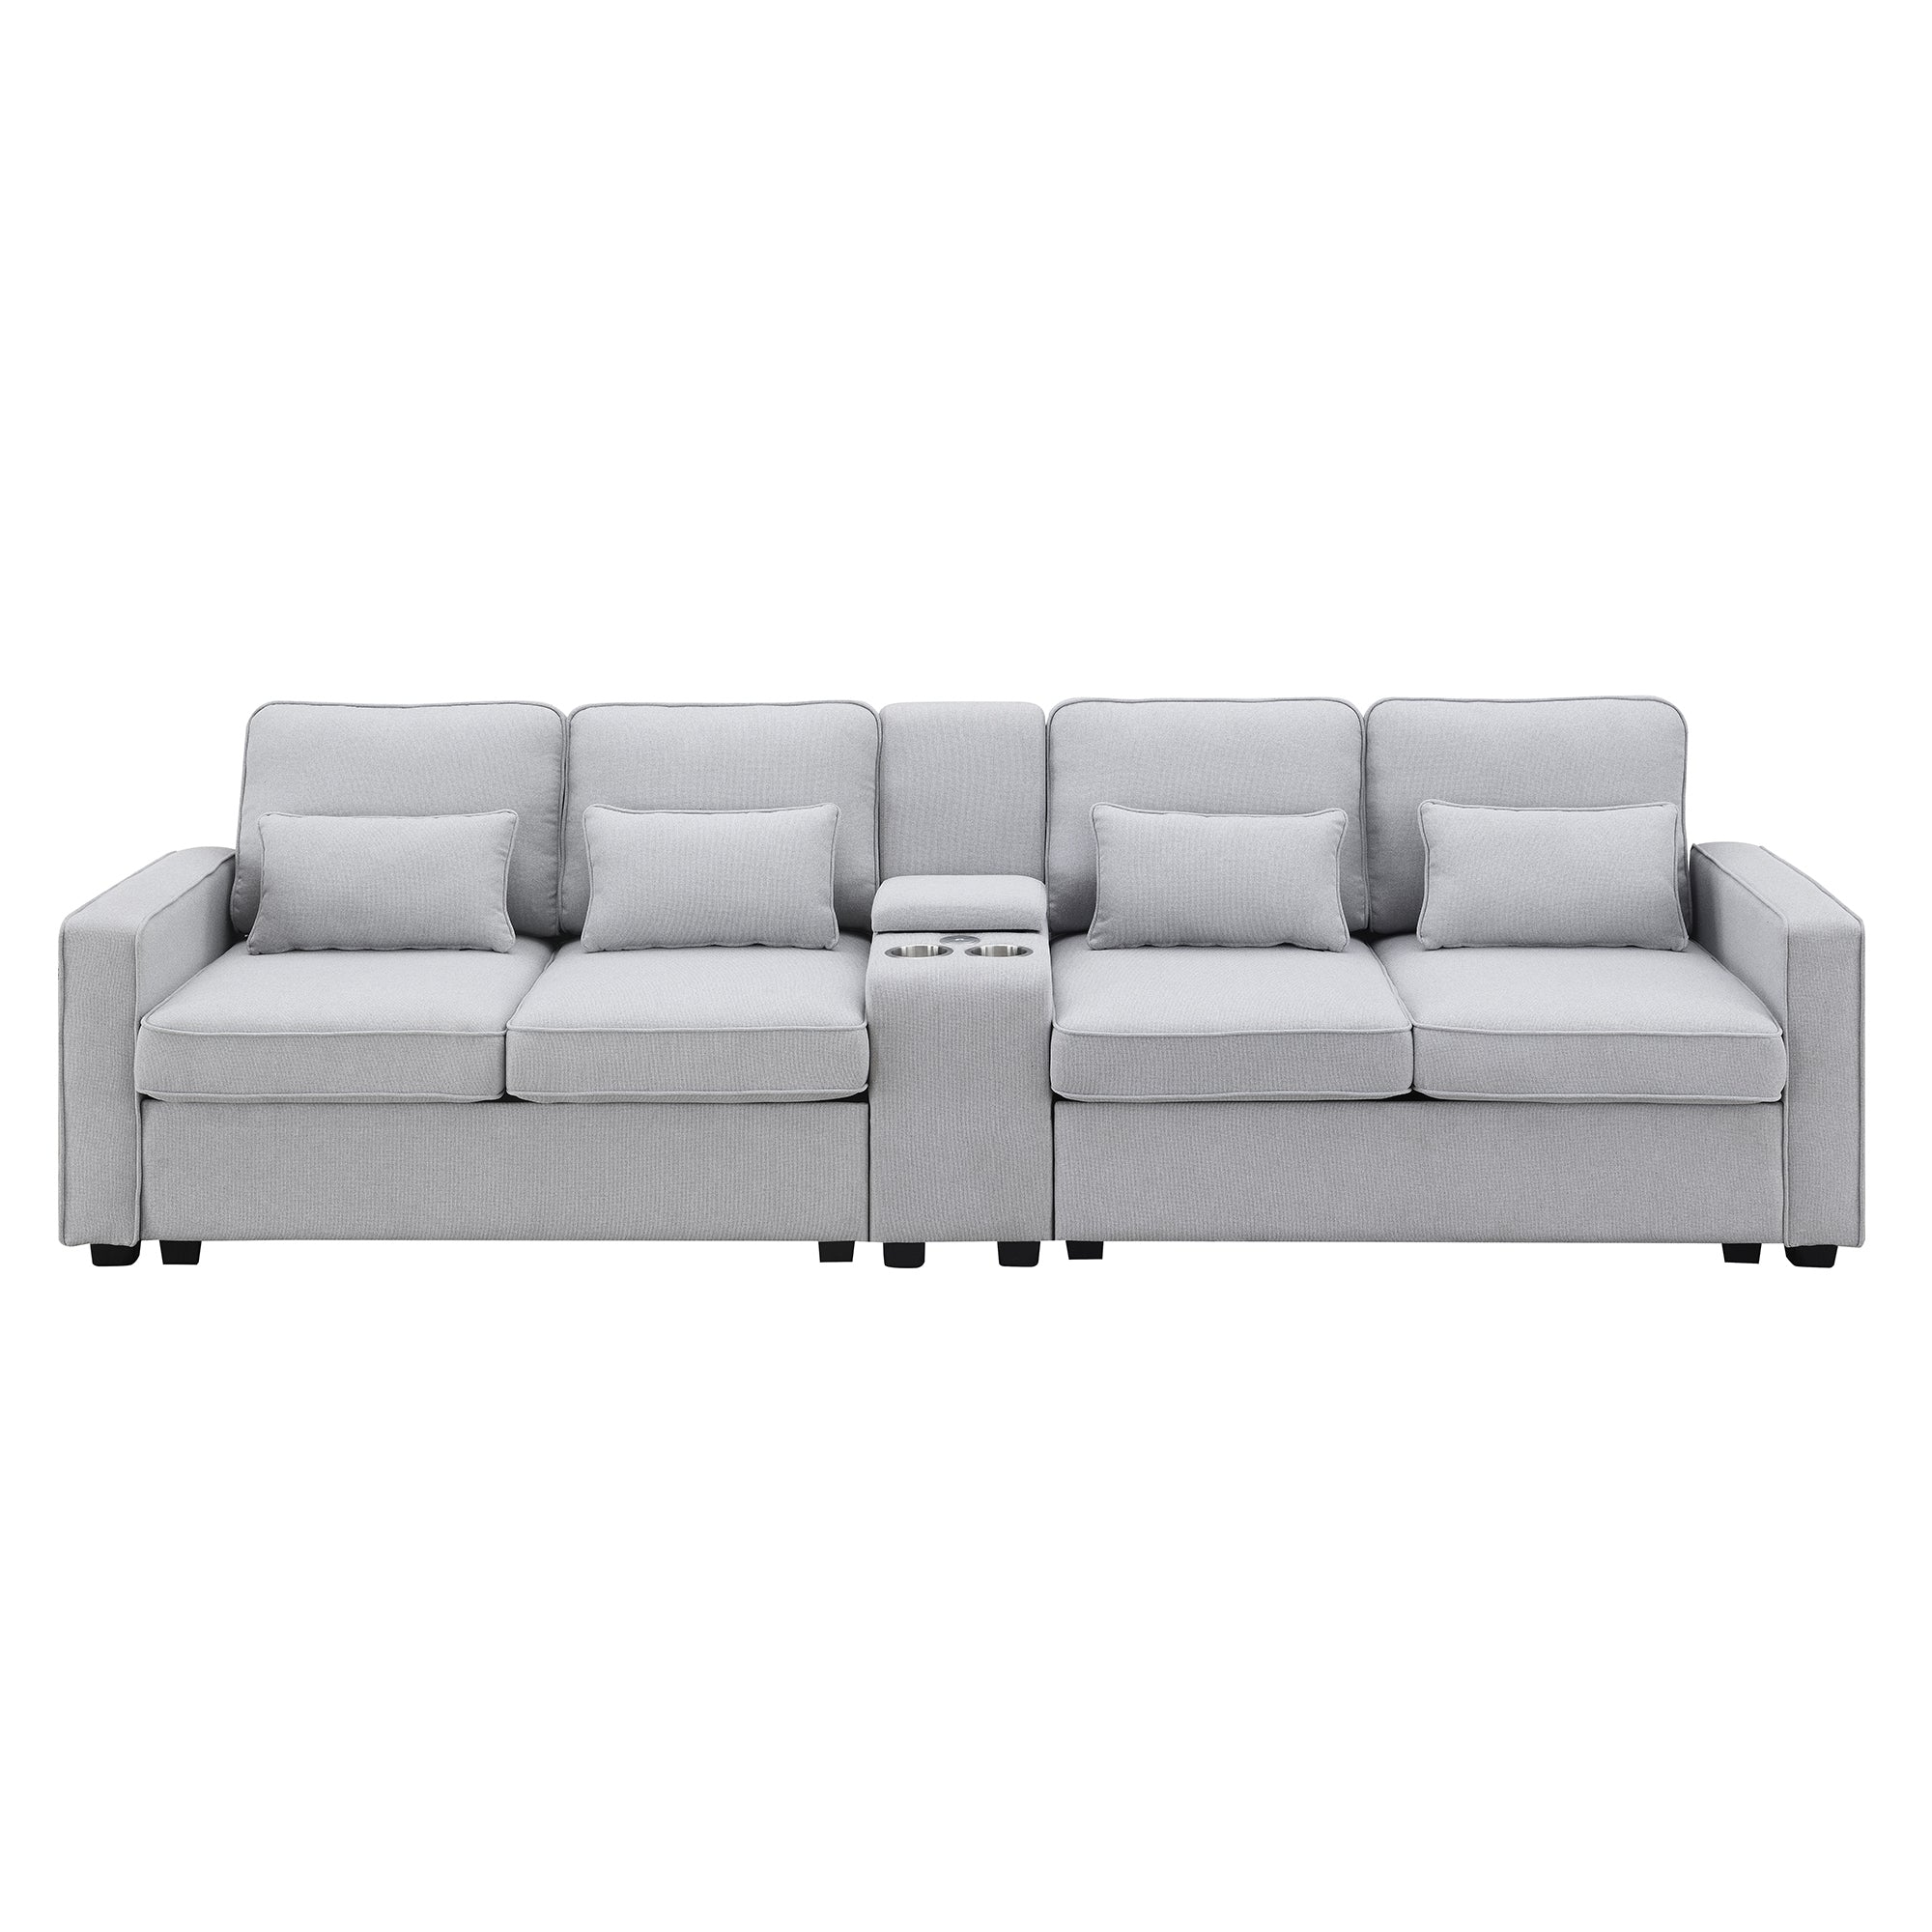 Clint 114.2" Linen 4 Seater Sofa with Console, 2 Cupholders and 2 USB Ports Wired or Wirelessly Charged